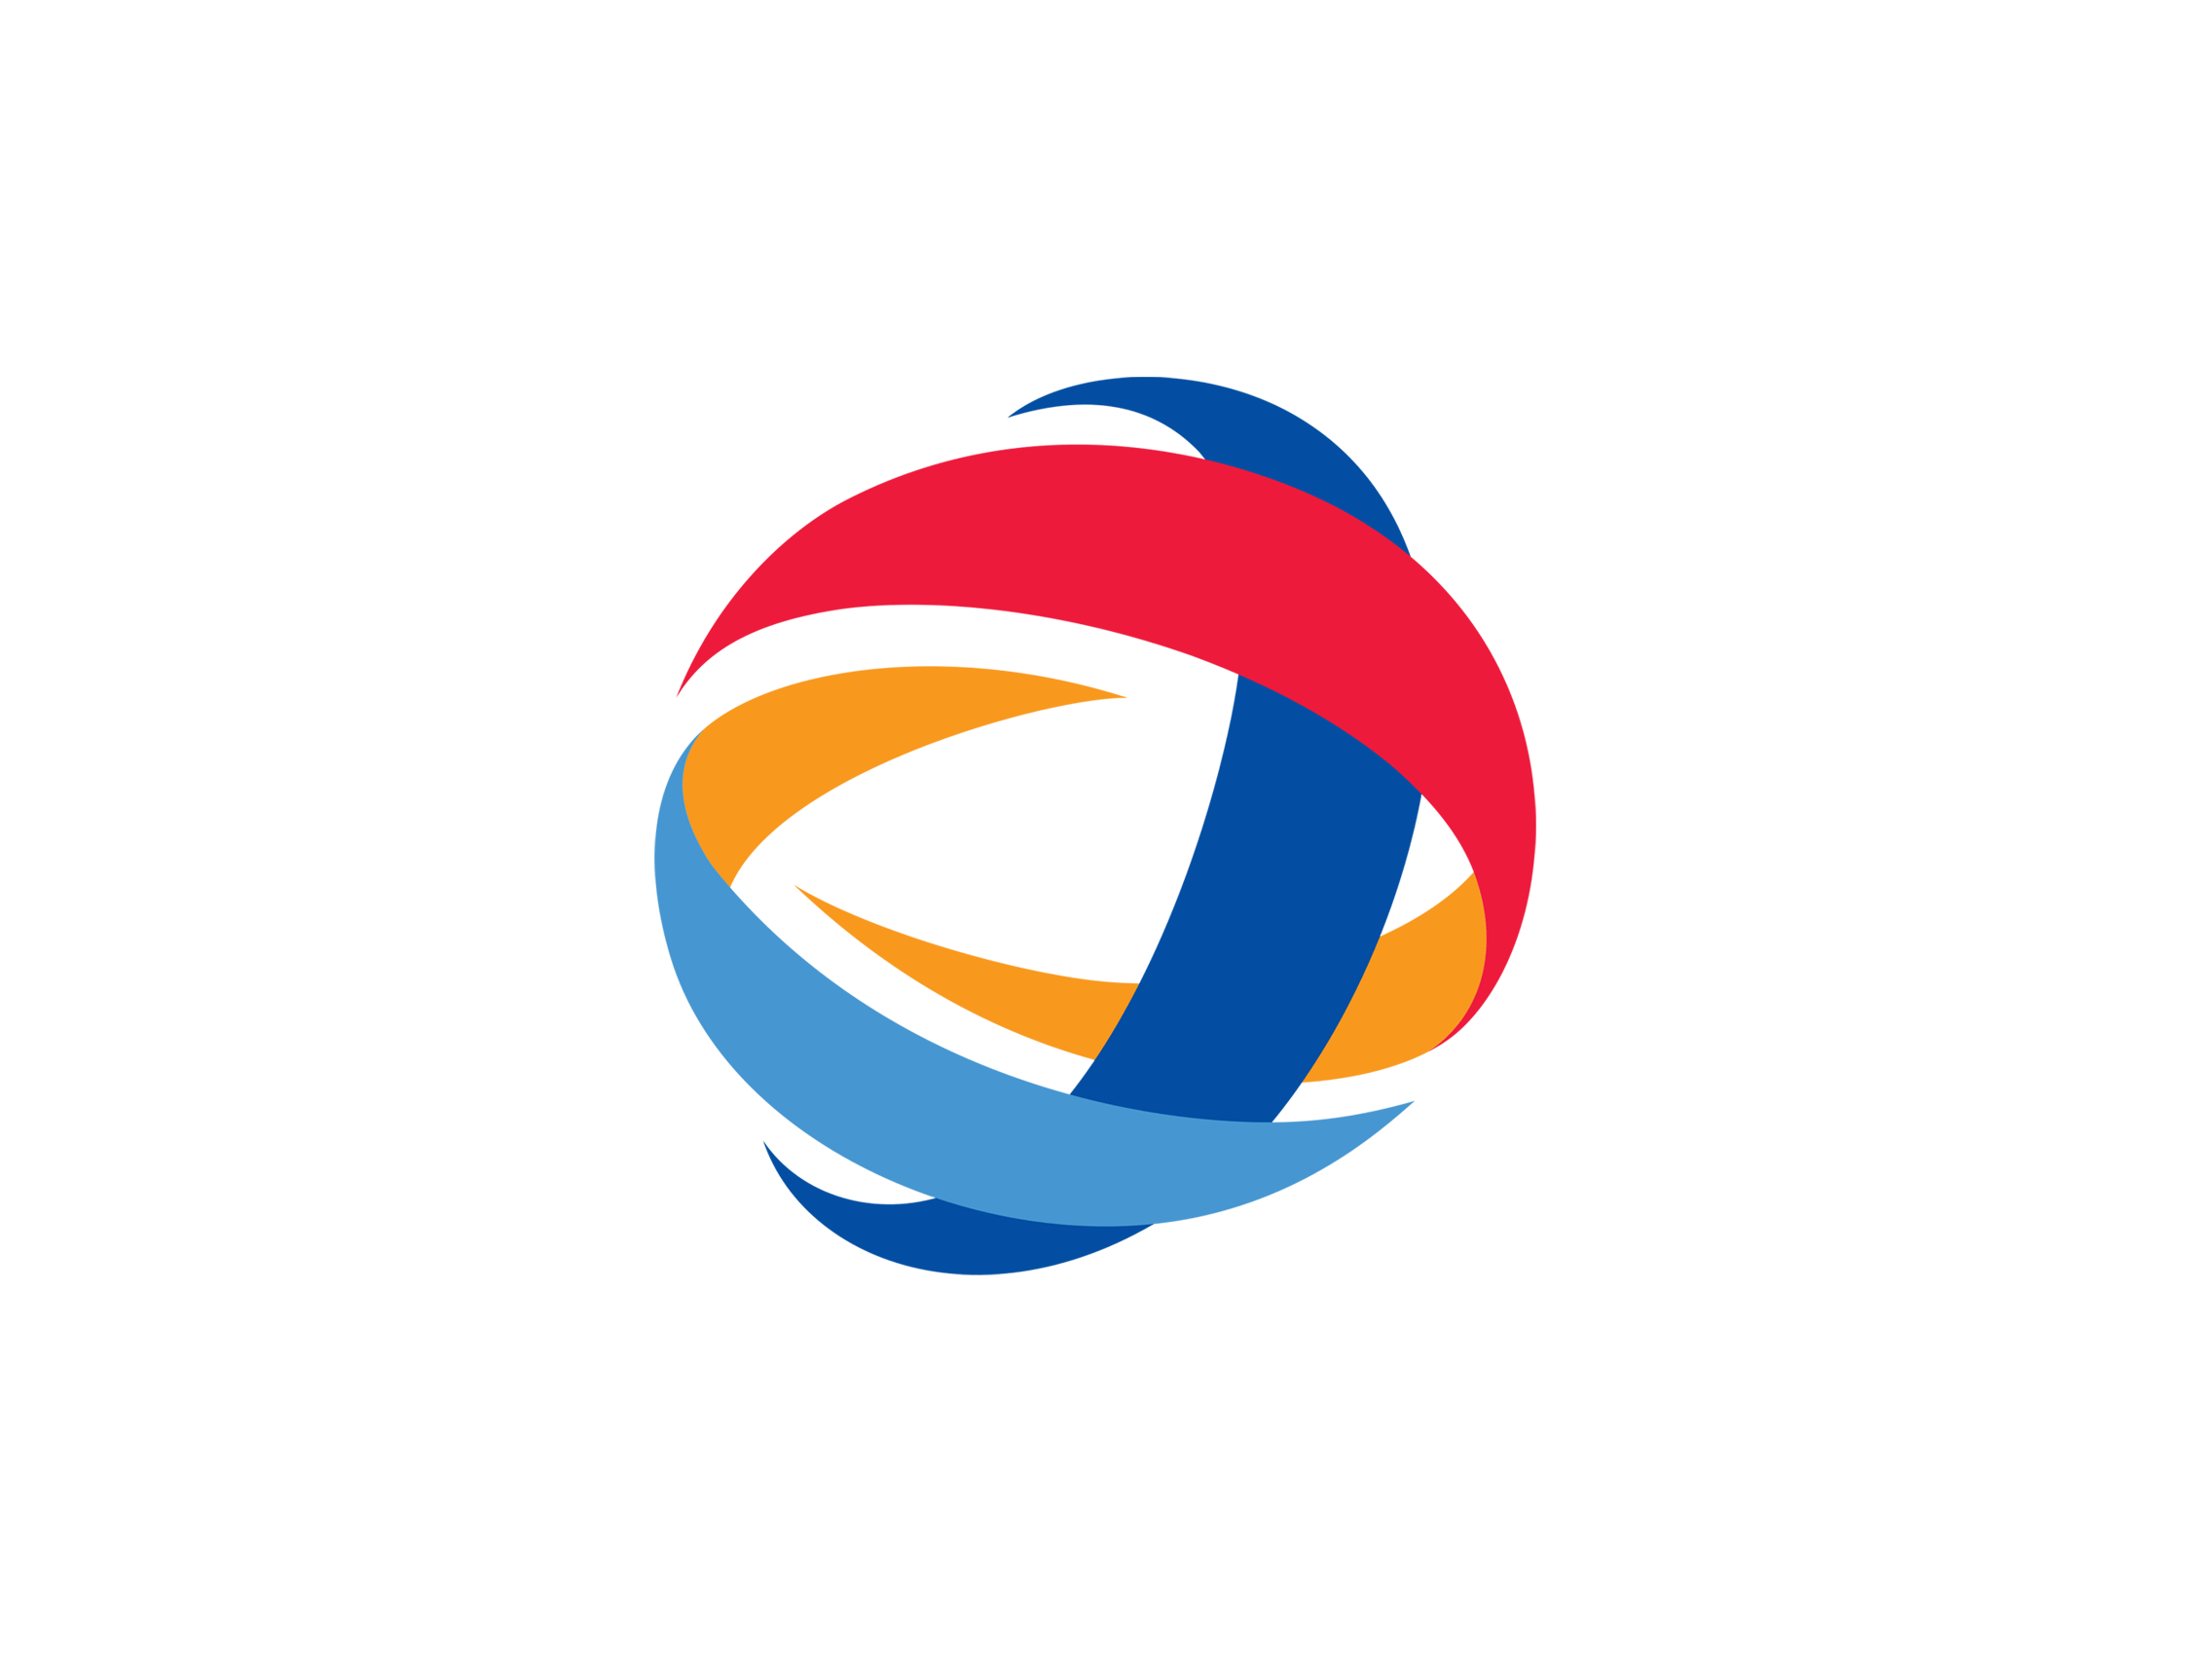 Red White Blue Company Logo - Red blue and orange Logos